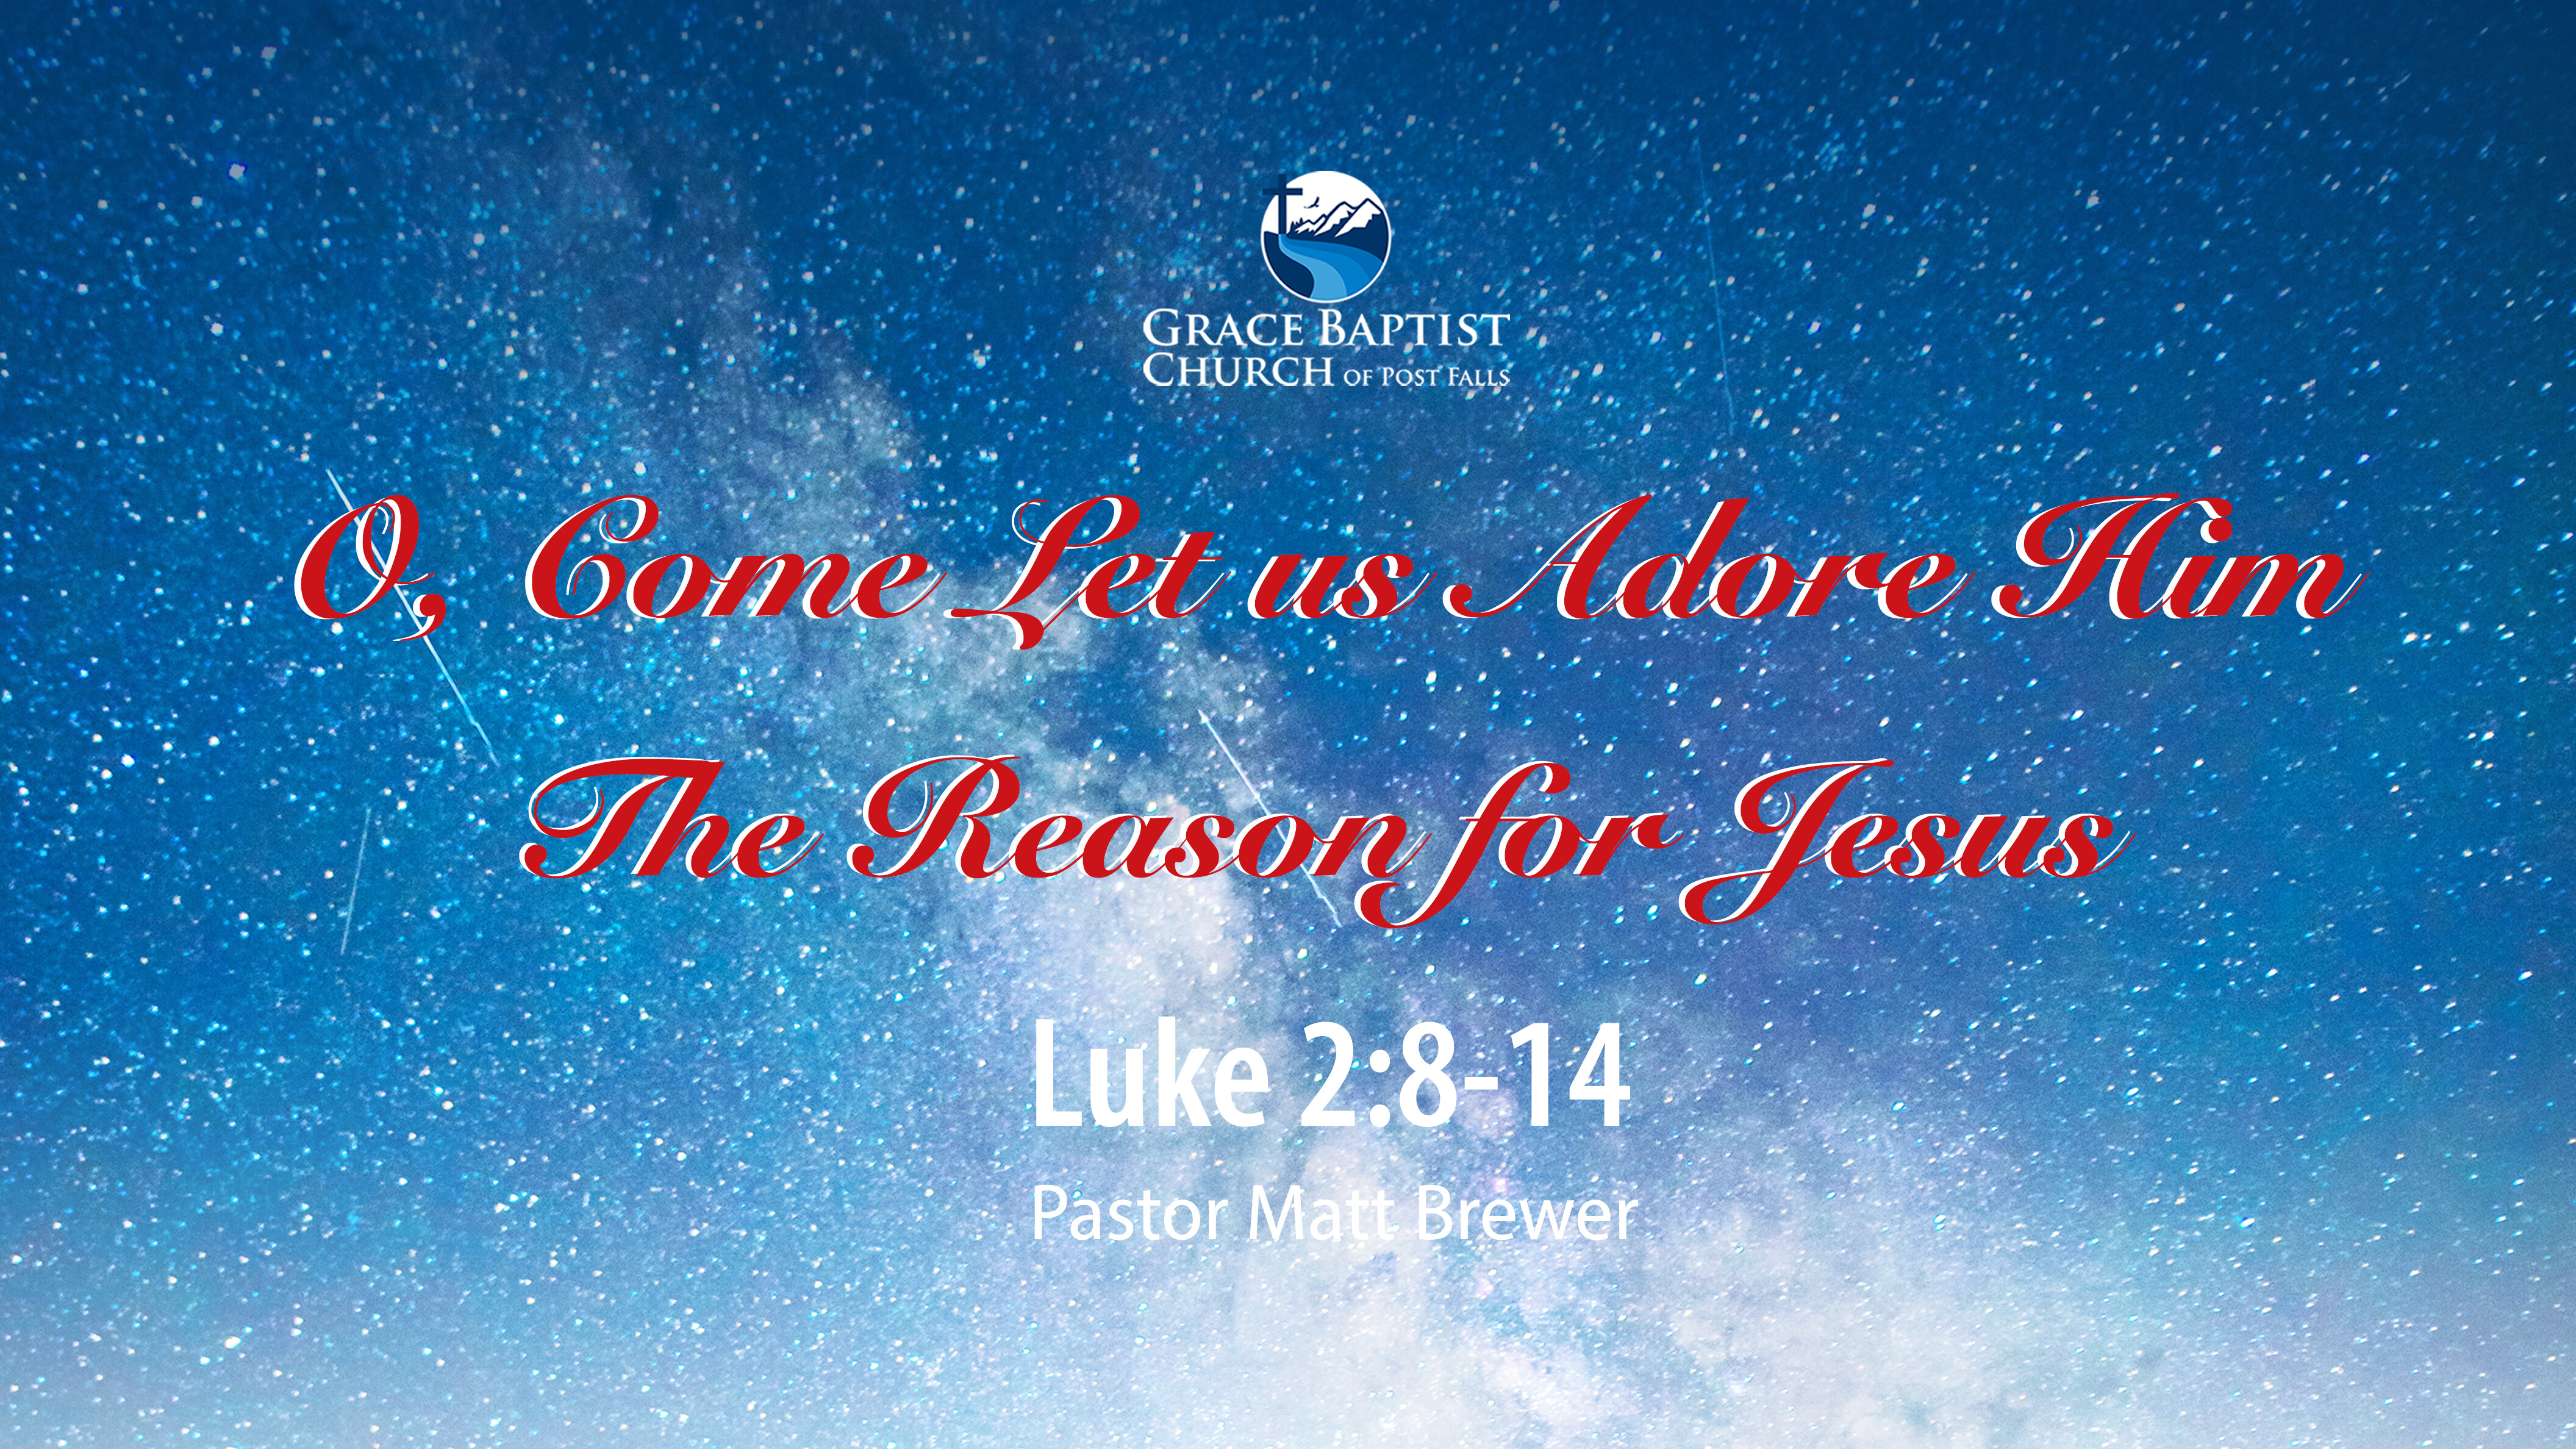 O, Come Let Us Adore Him (The Reason for Jesus)